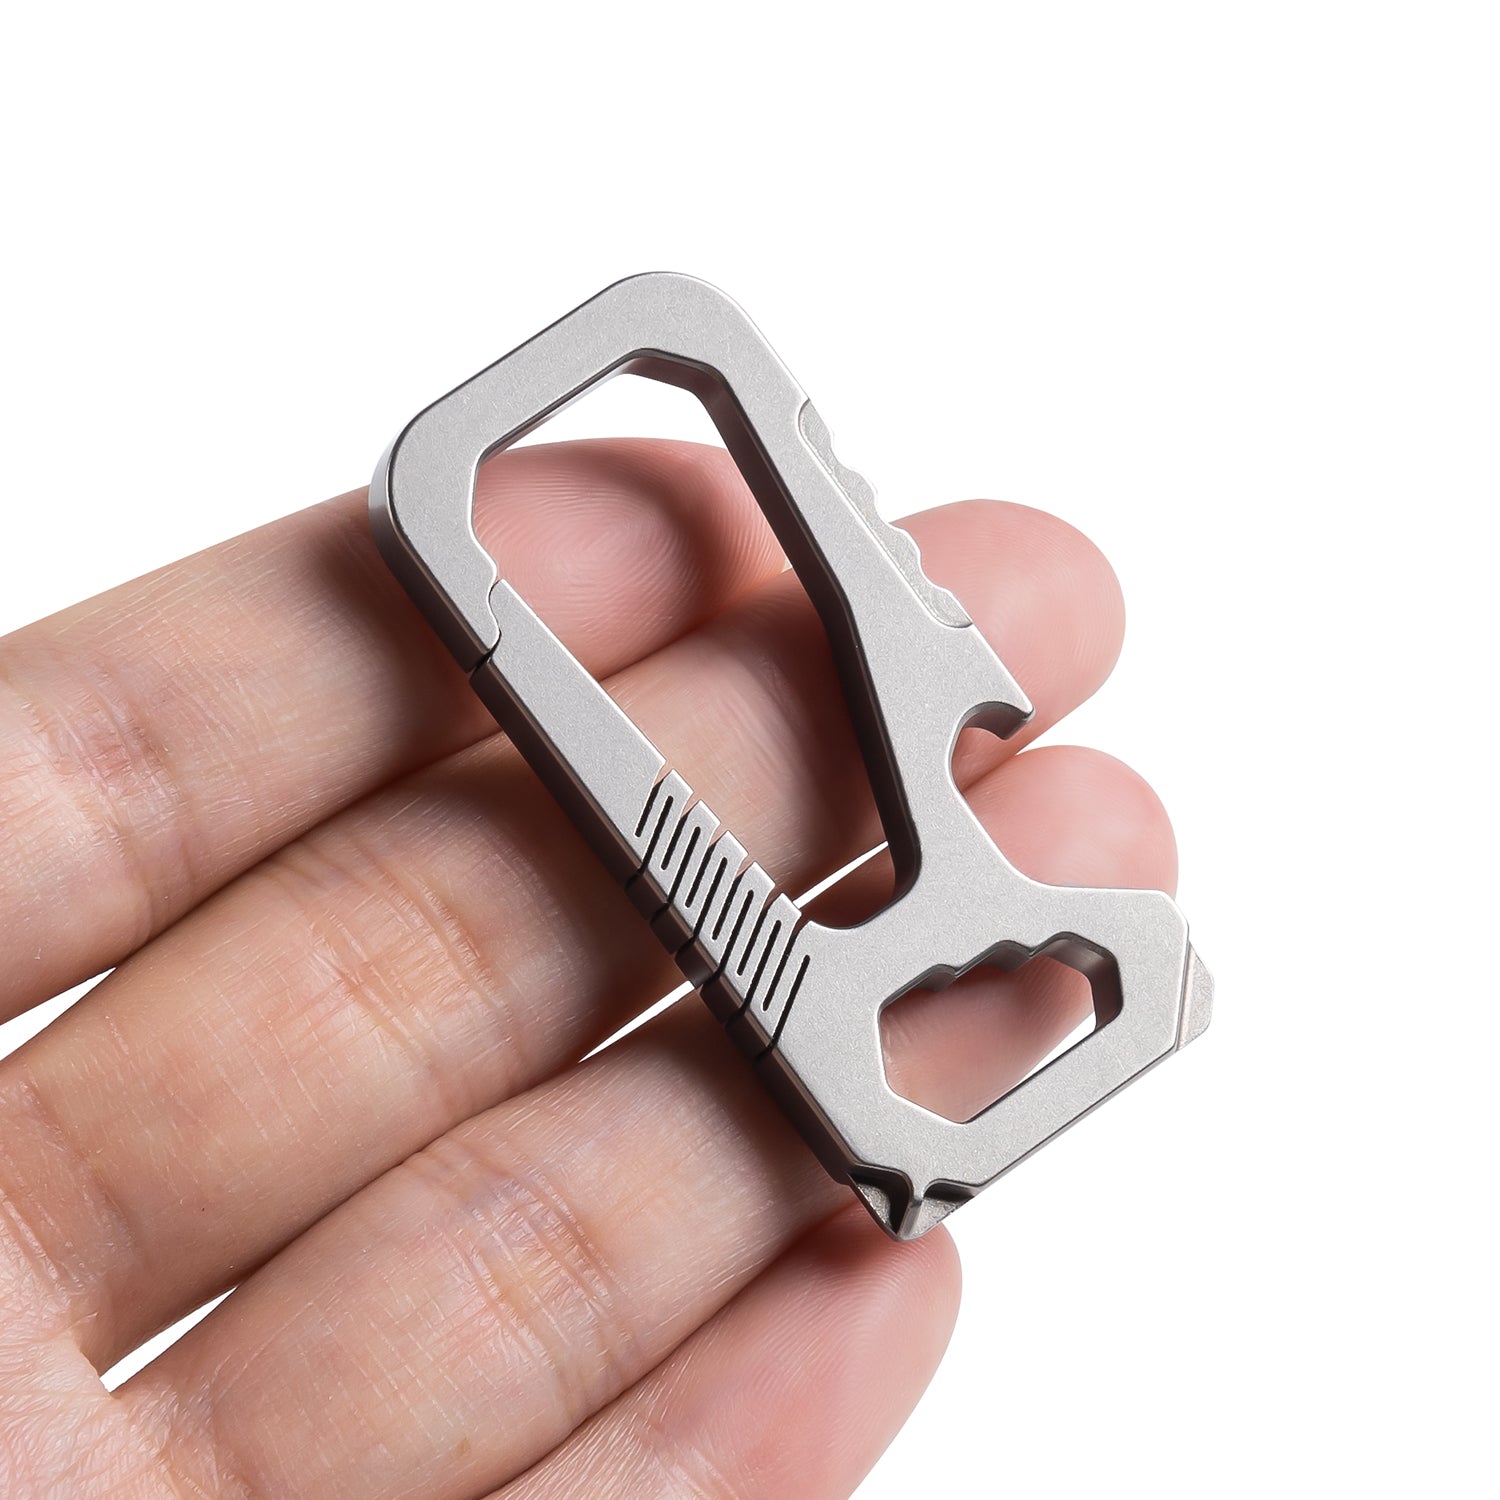 The Best EDC Carabiners for Keys